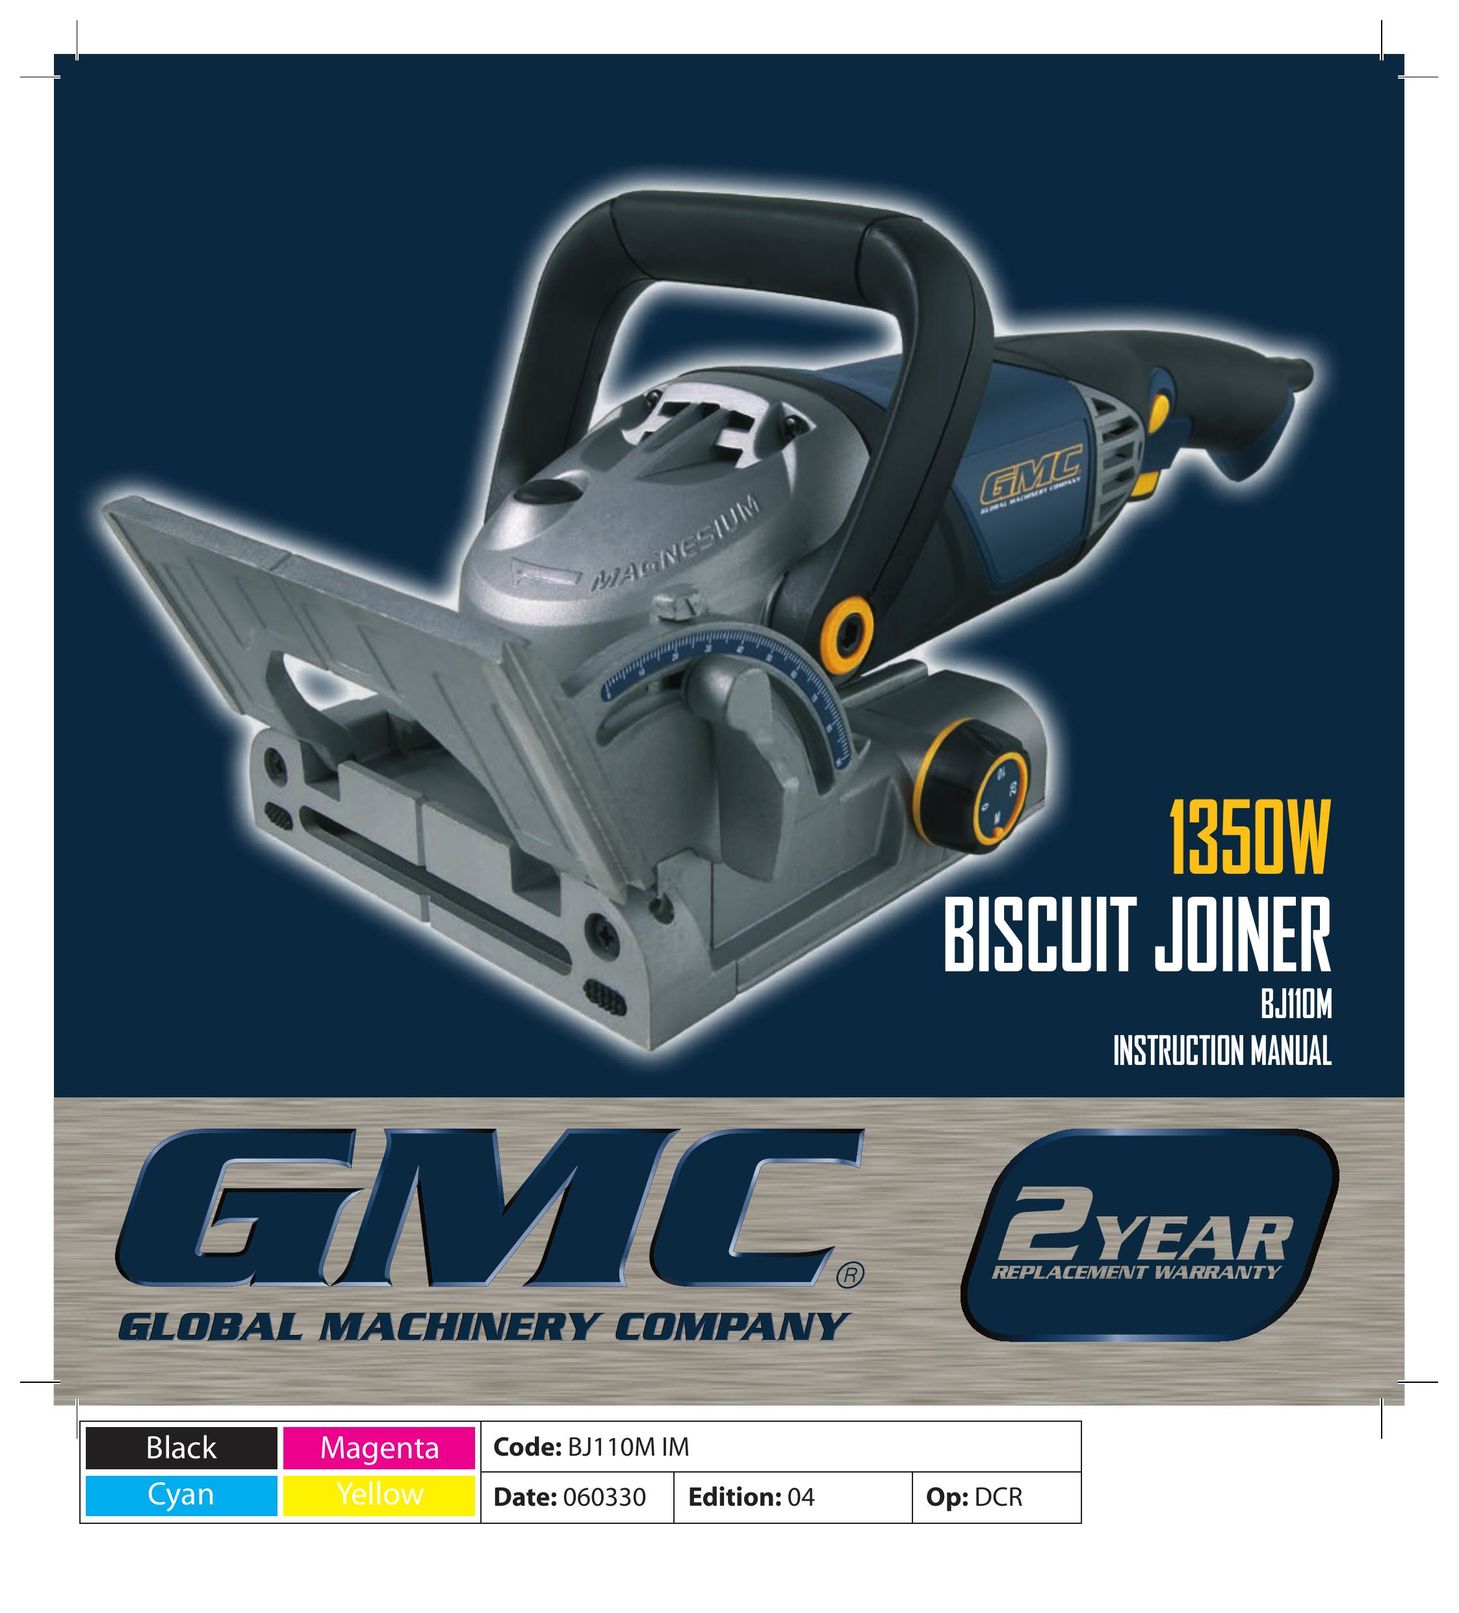 Global Machinery Company BJ110M Biscuit Joiner User Manual